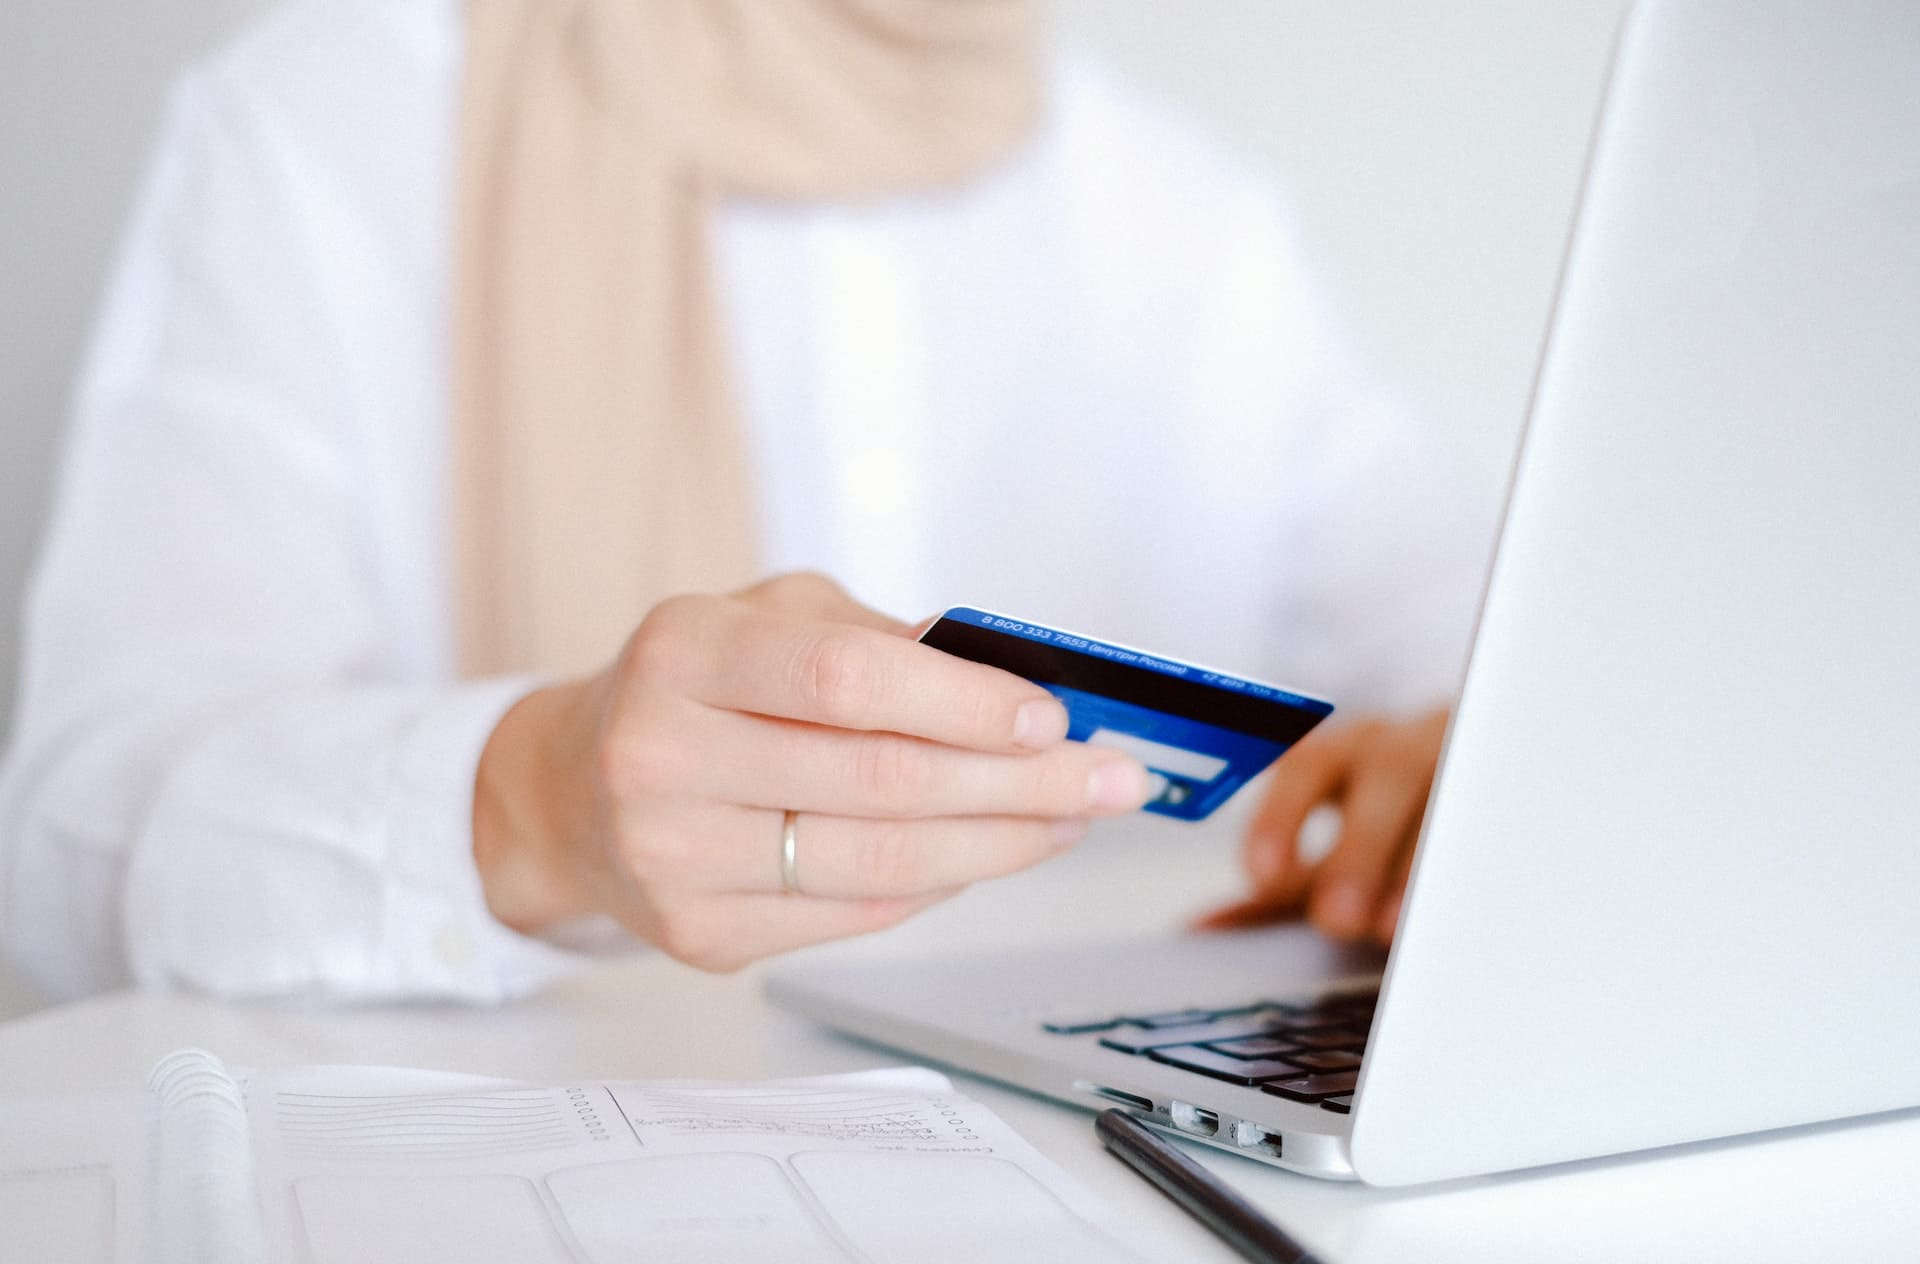 A woman holding a credit card while typing on a laptop.